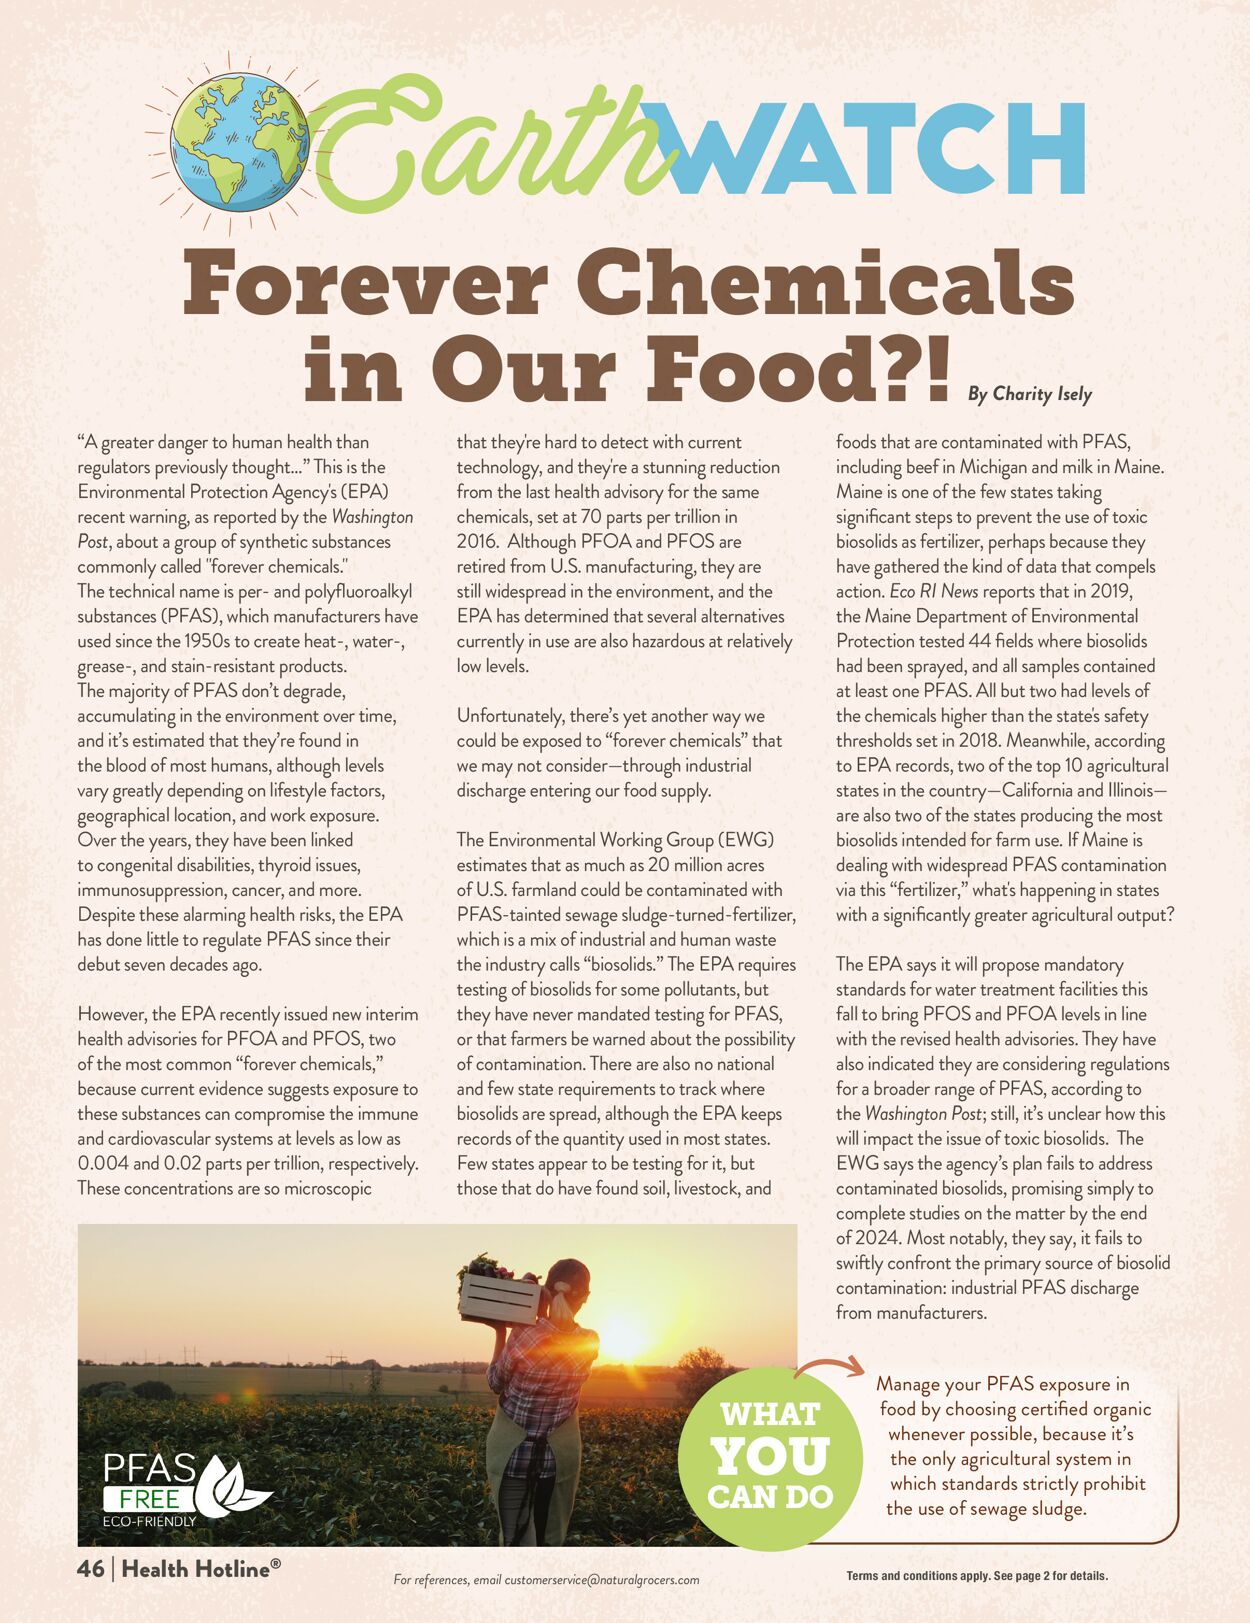 Natural Grocers Ad from 09/09/2022